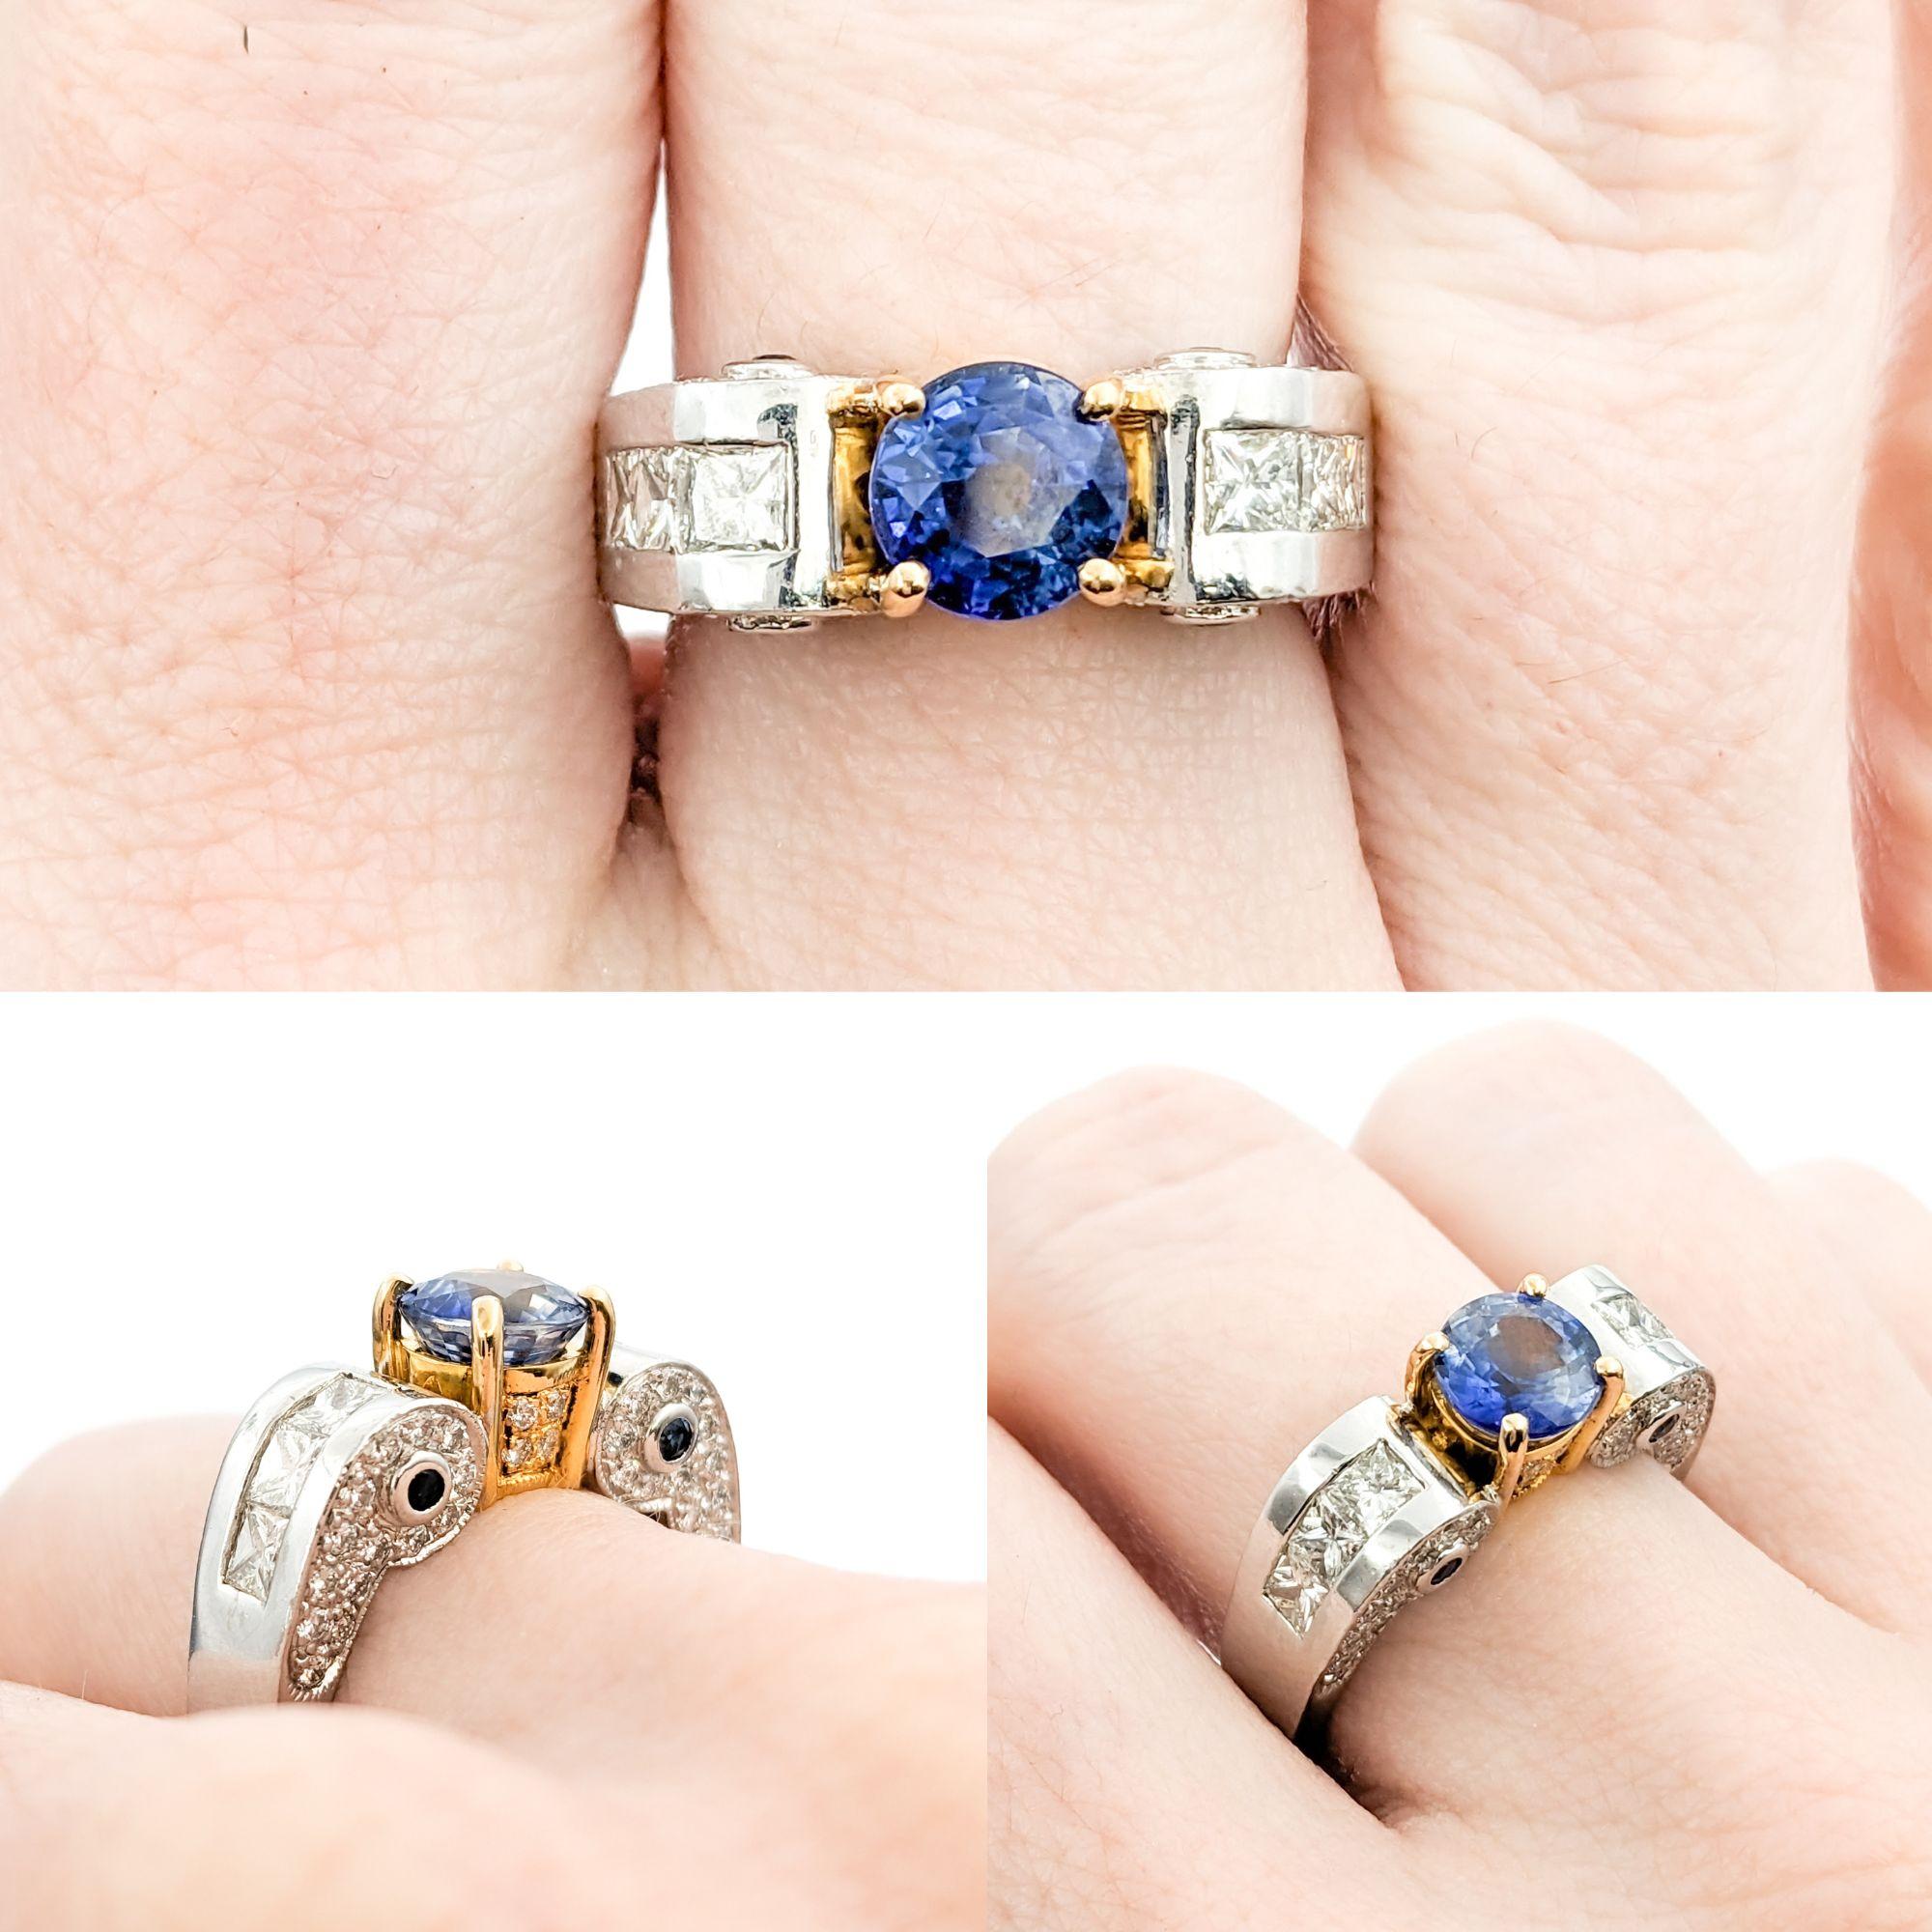 Modern Sapphire & Diamond Ring - 18K Gold

This beautiful ring is crafted in 18kt white and yellow gold and features a 1.37ct round-cut sapphire and 1.00ctw princess and round brilliant-cut diamonds, VS2-SI1 clarity and H color. This ring is size 6